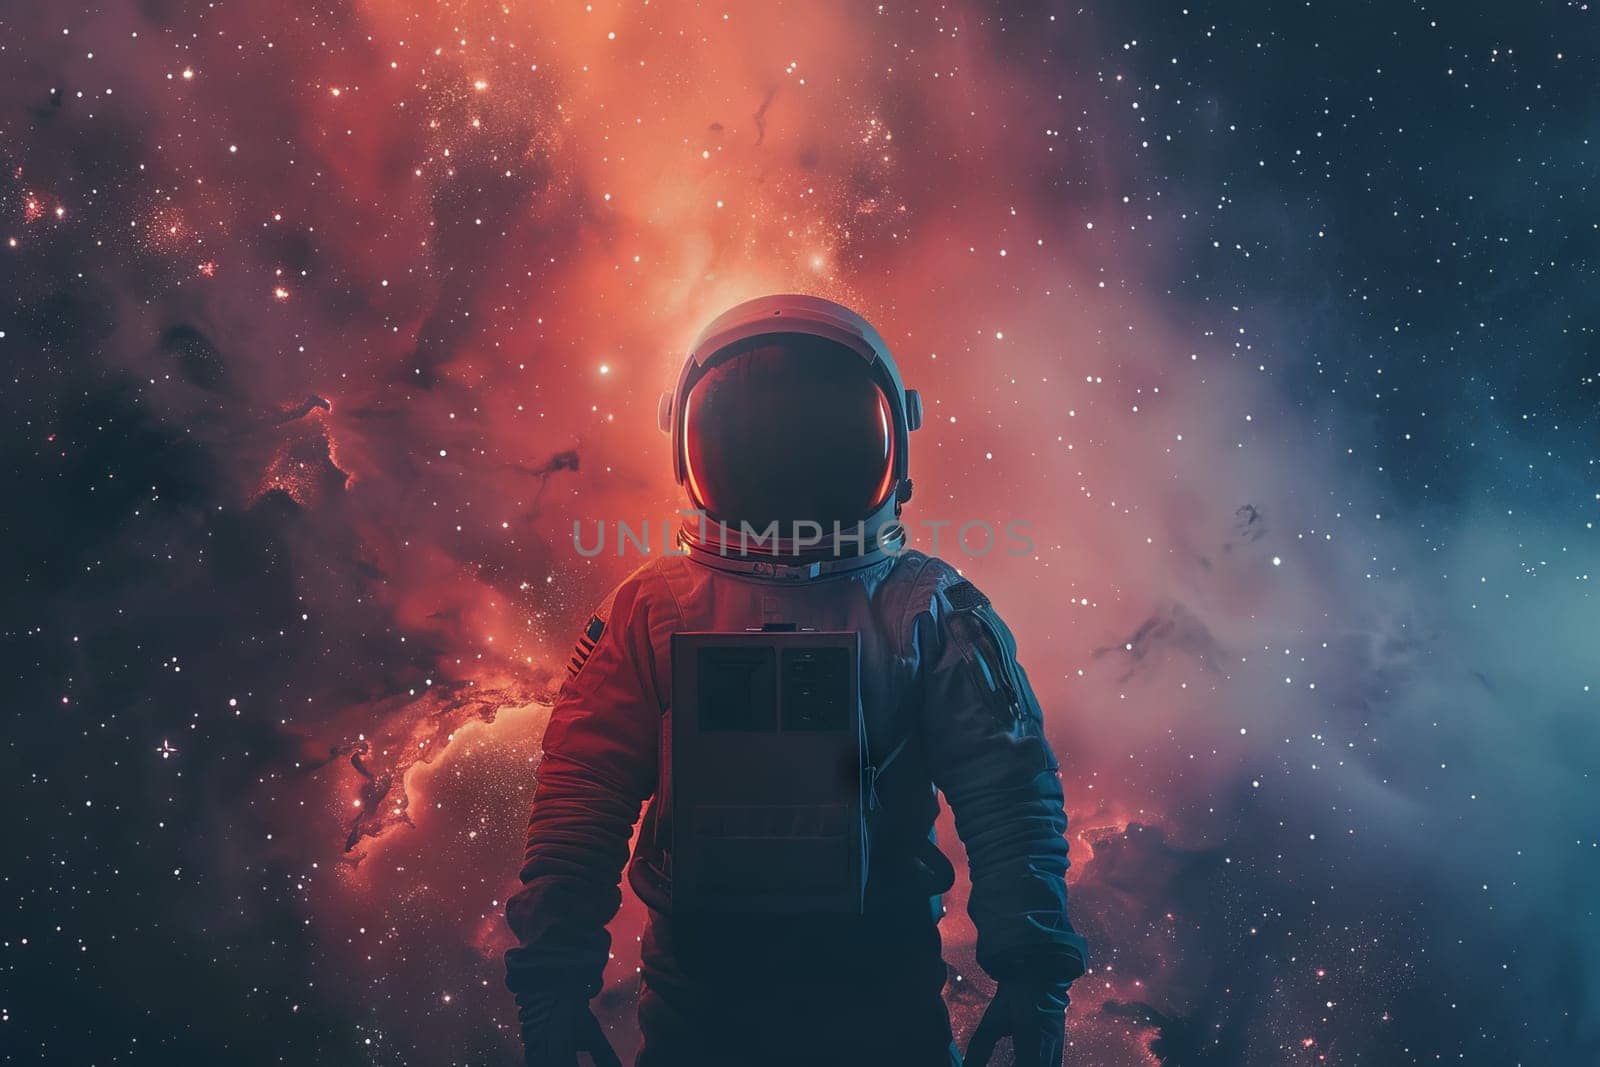 A man in a space suit stands in front of a colorful background of stars and clouds. Concept of adventure and exploration, as the astronaut is ready to embark on a journey into the unknown